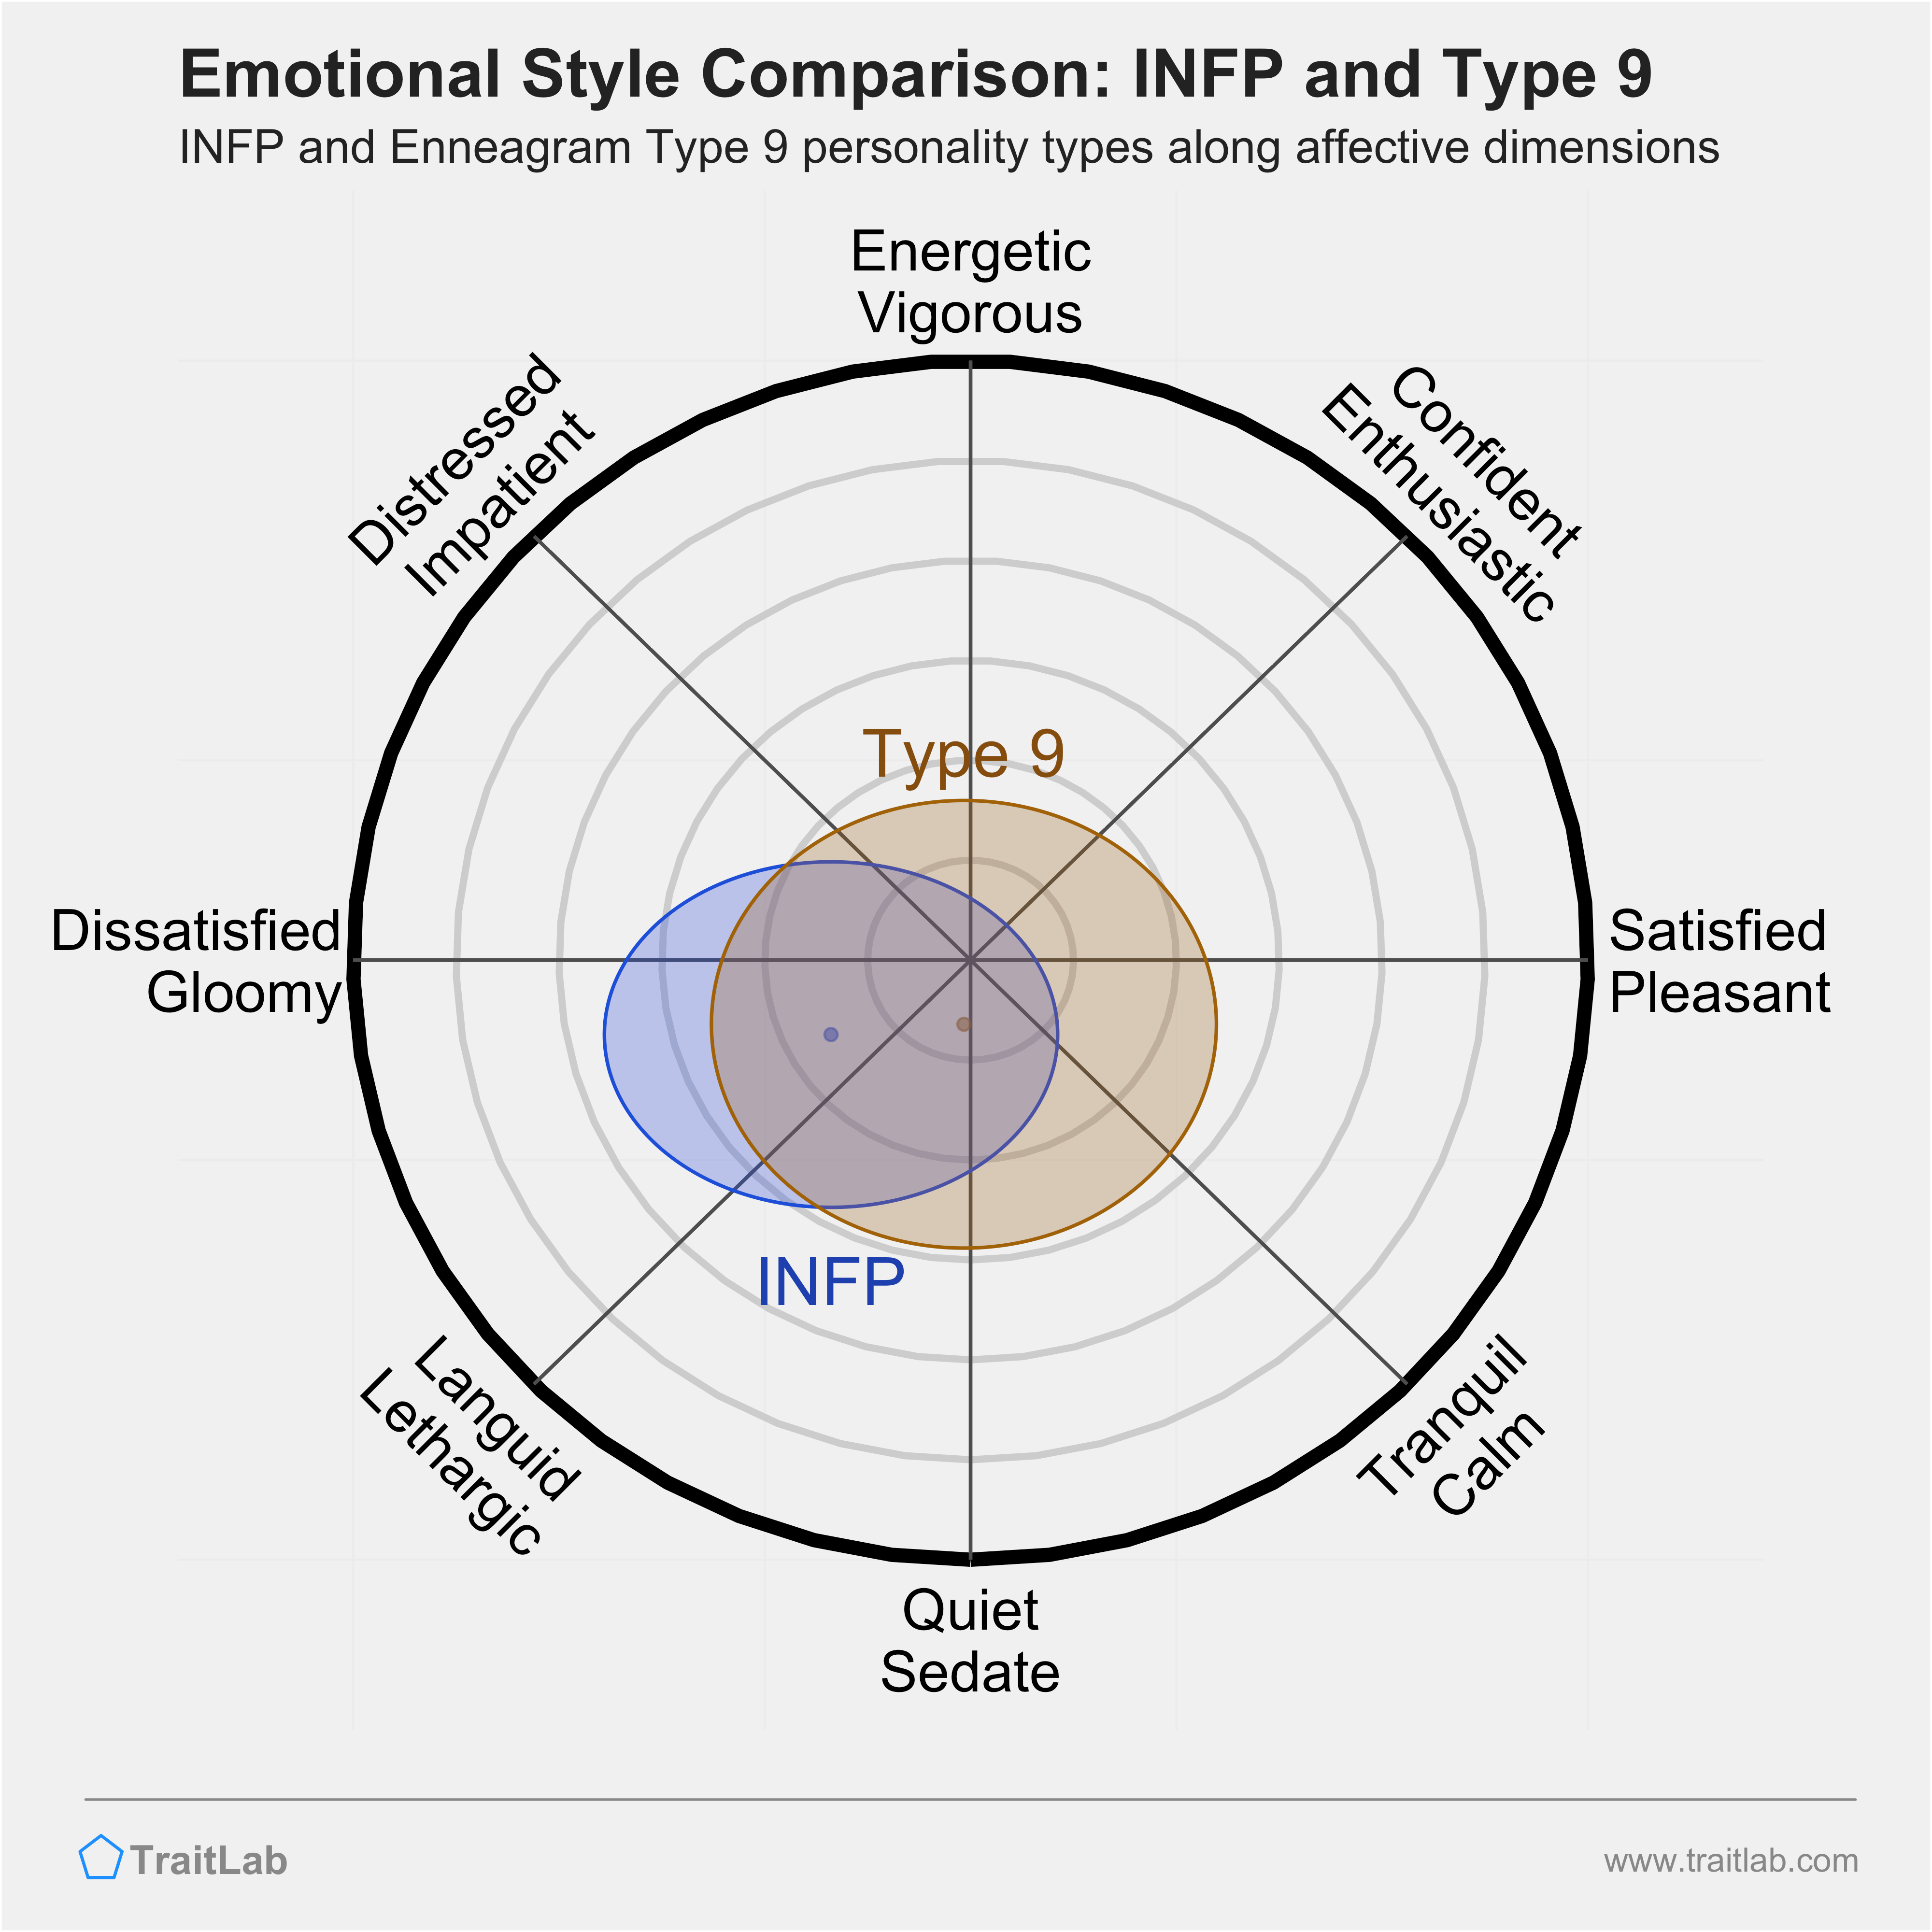 INFP and Type 9 comparison across emotional (affective) dimensions